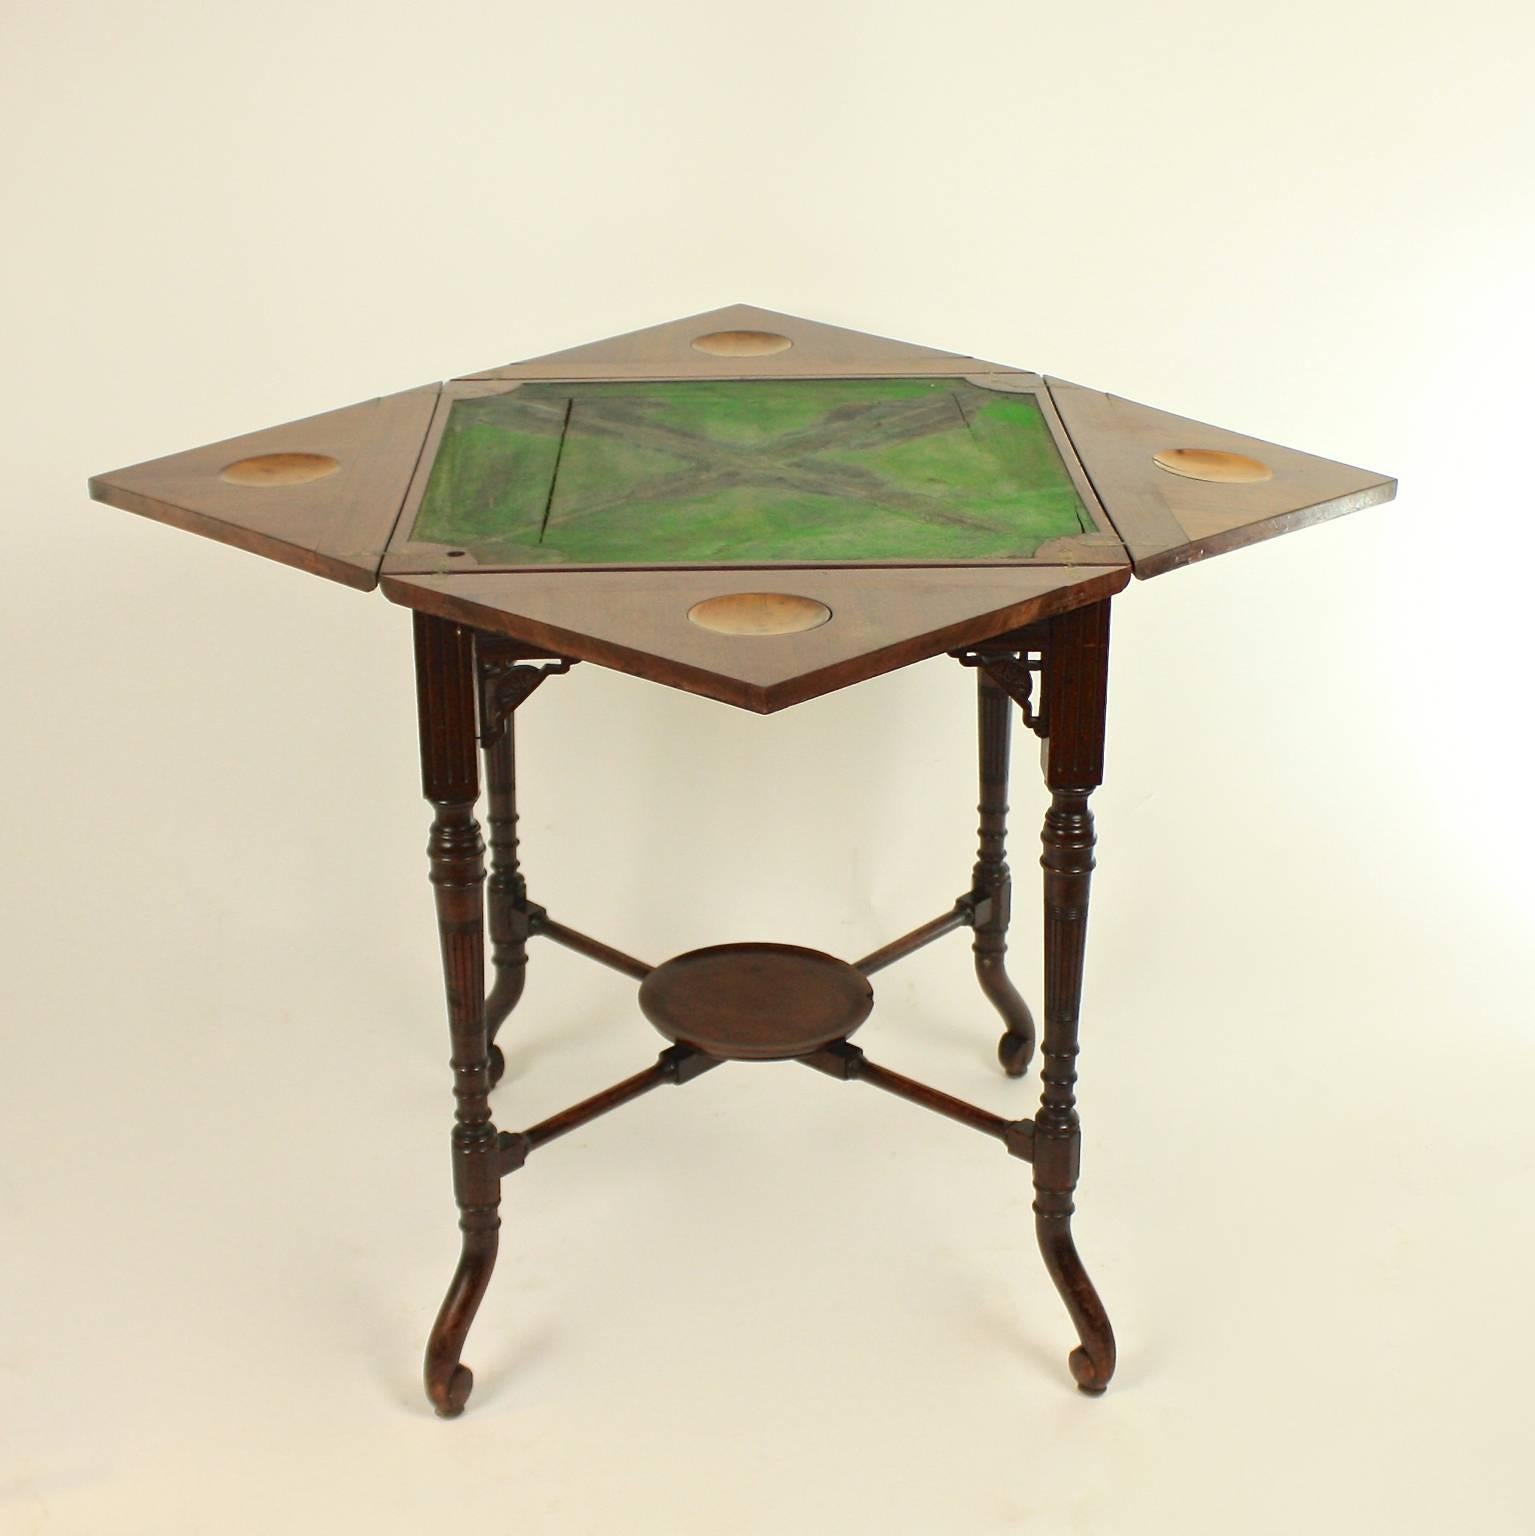 An Edwardian envelope card table which opens to reveal baize playing surface with four money wells in satinwood, above a single frieze drawer, raised on elegantly turned legs with a lower center tier platform.
This wonderful card table is in